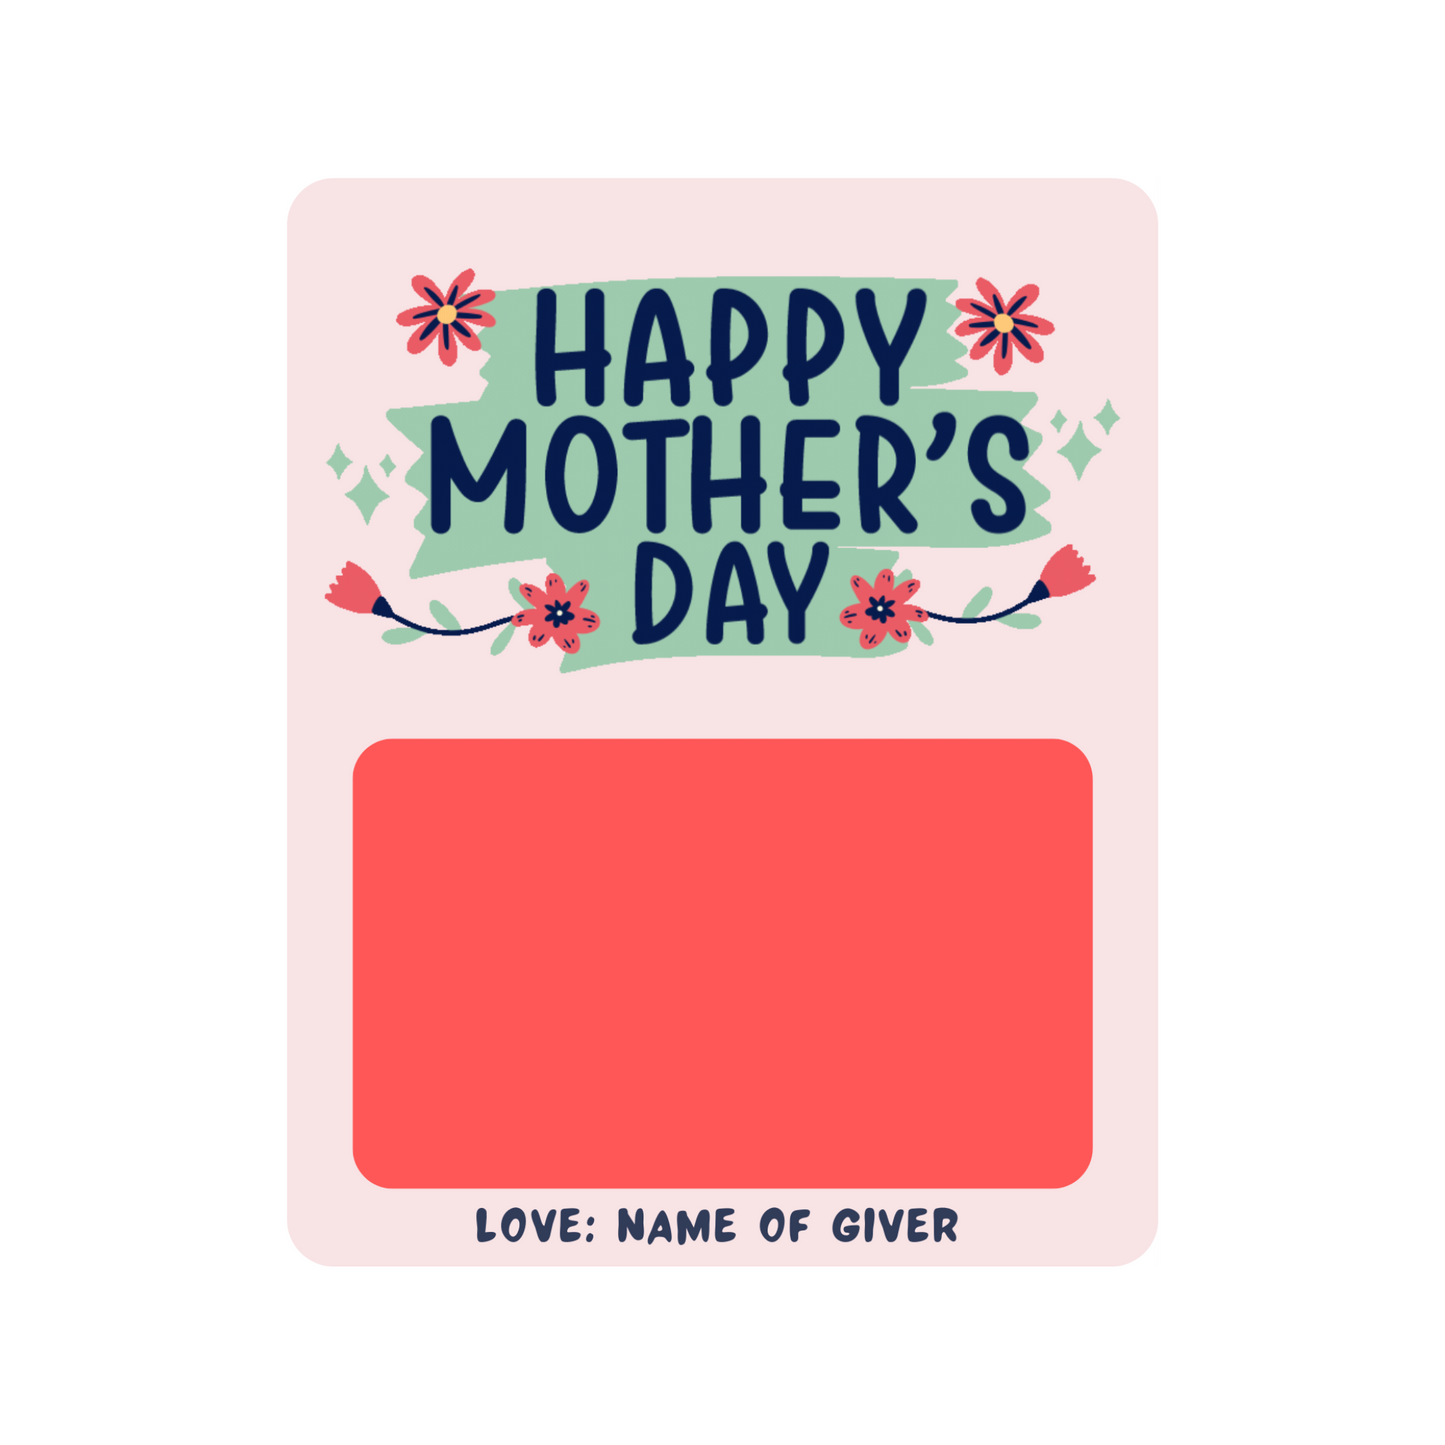 Personalized Happy Mother's Day Flowers Gift Card holder greeting card